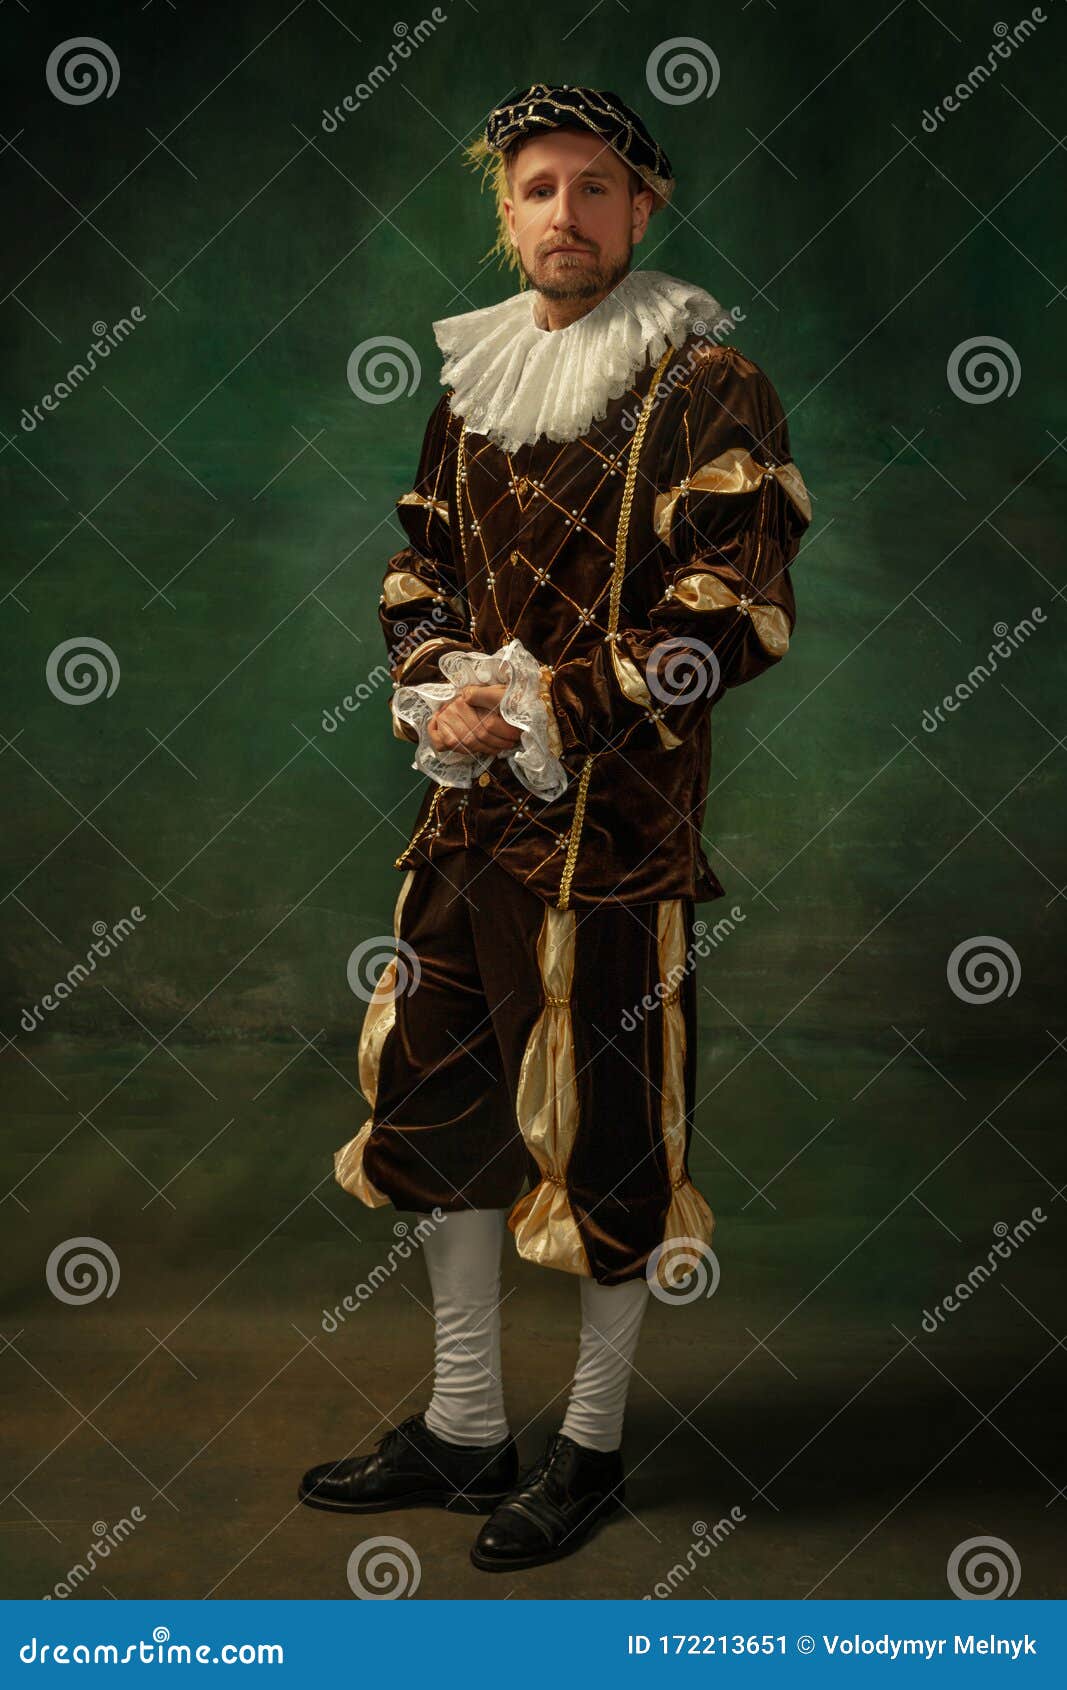 male royal medieval clothing